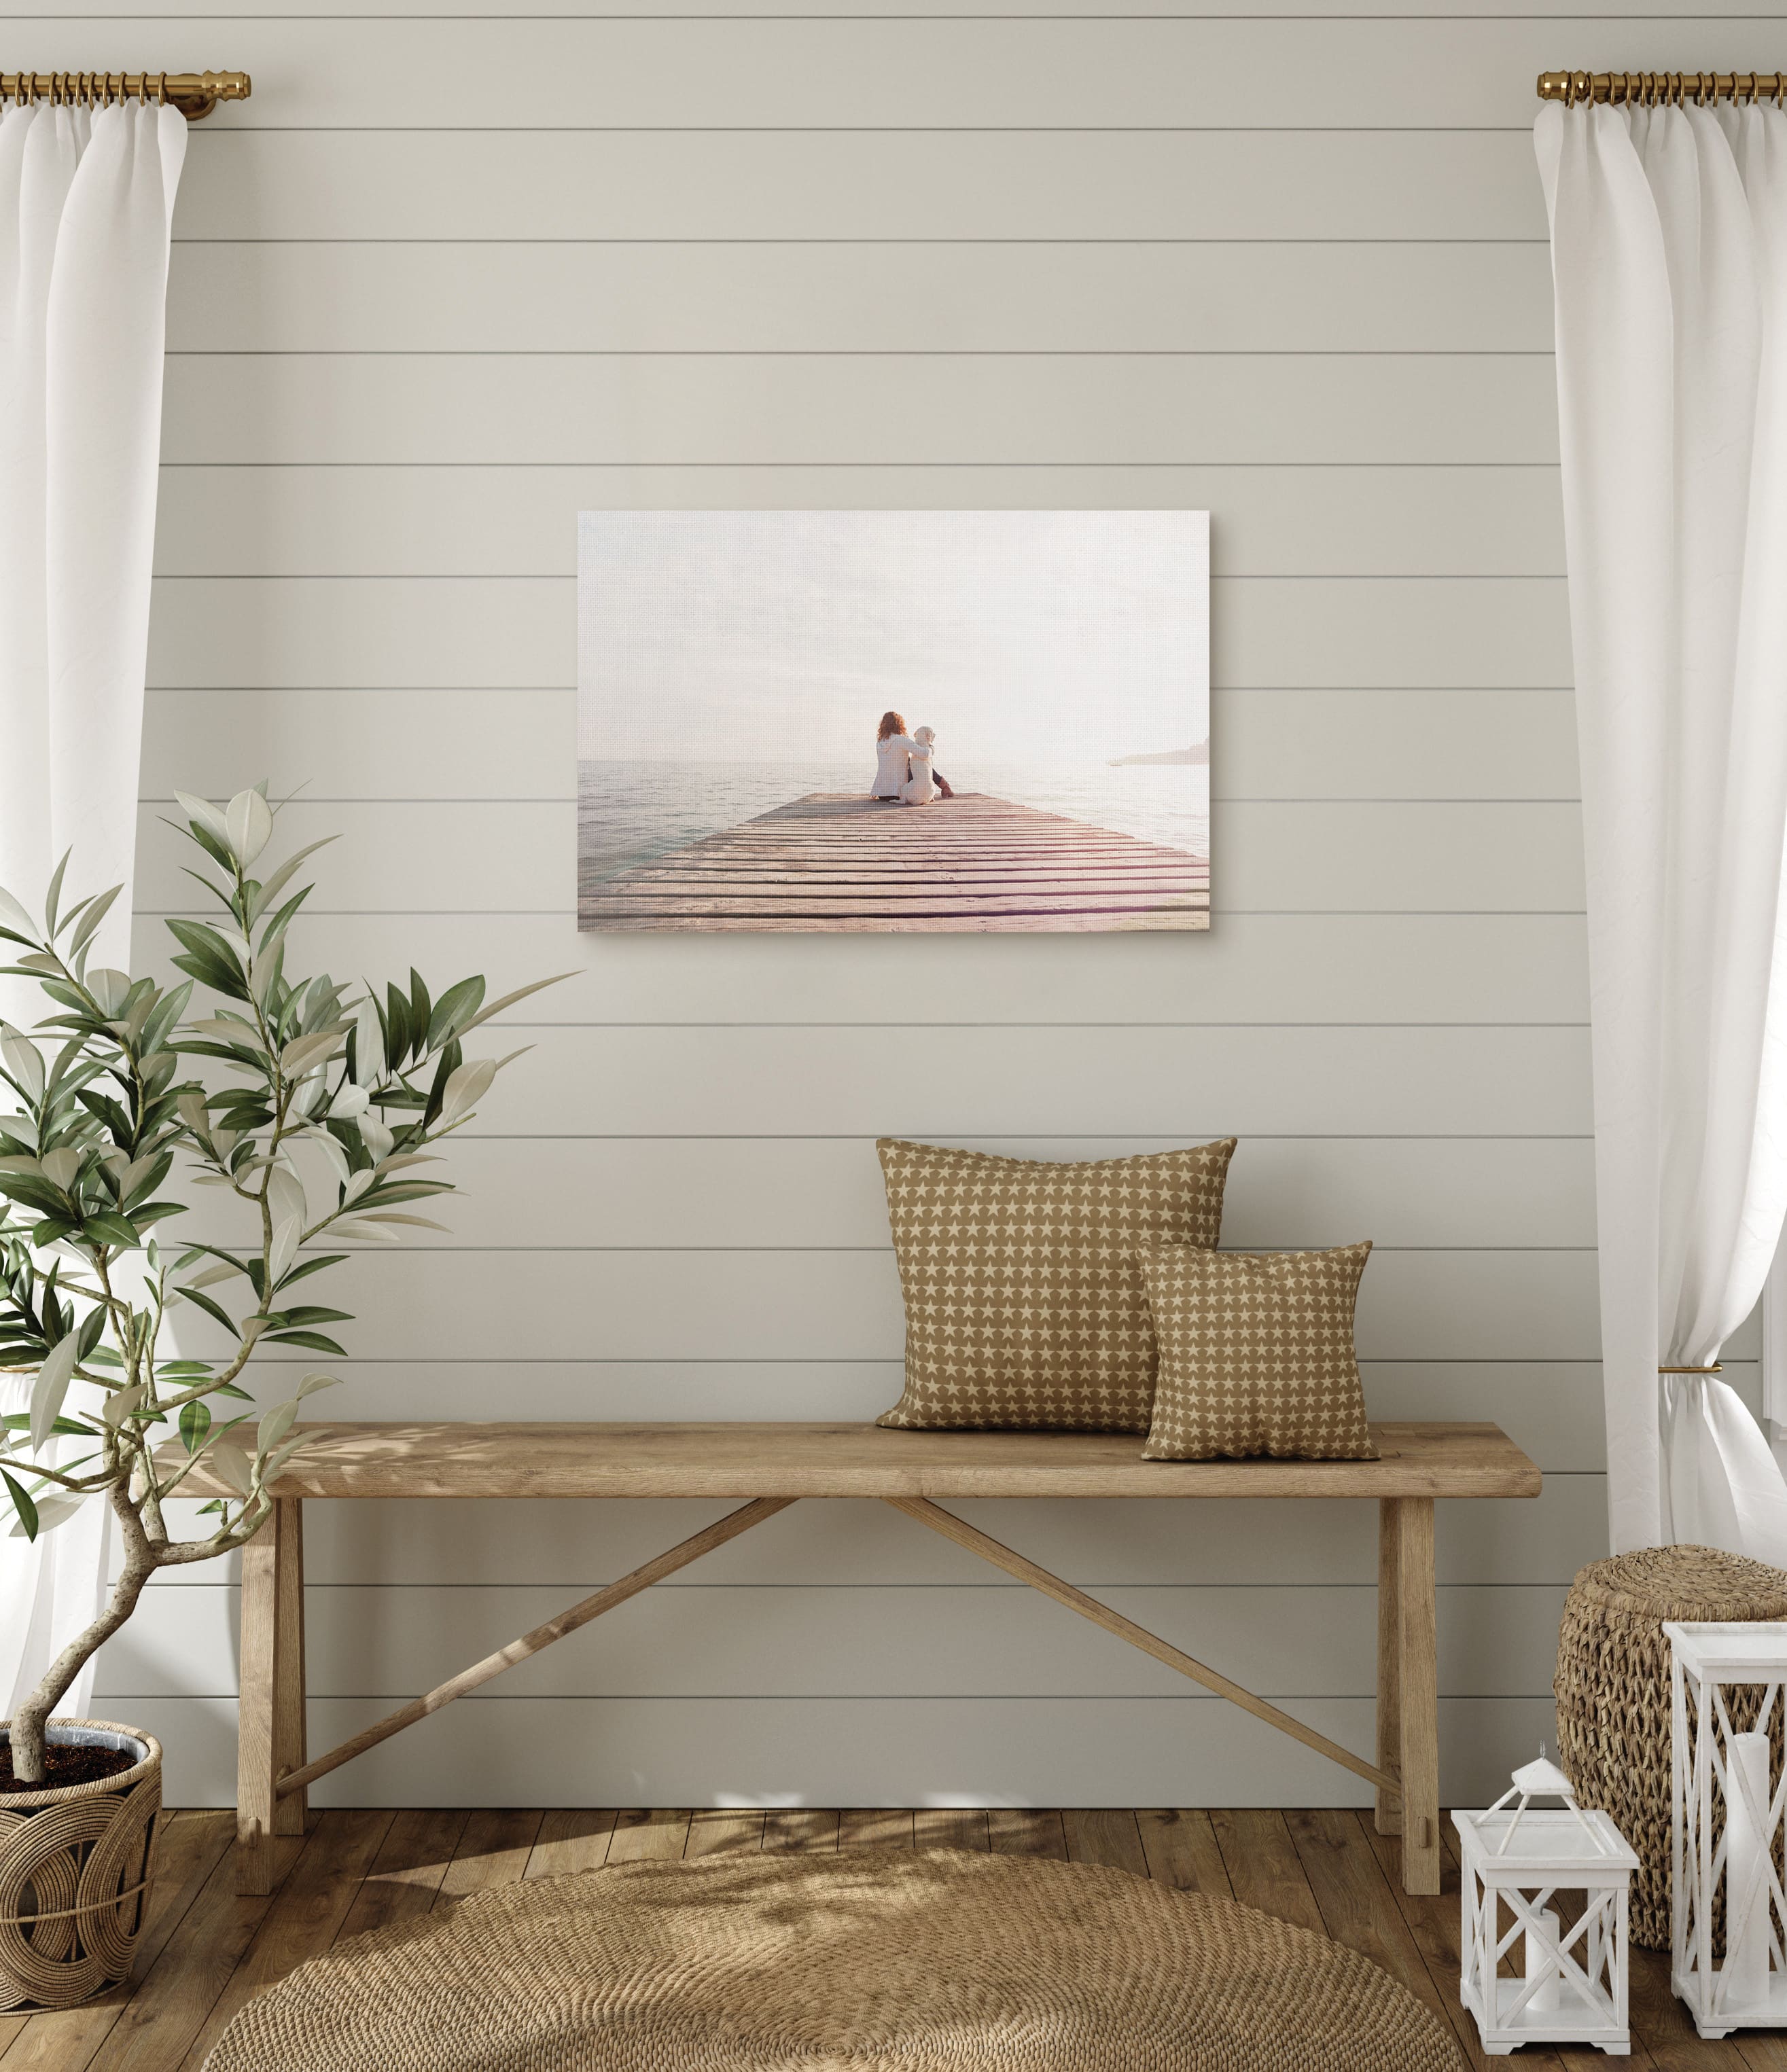 Canvas print in living room of woman and dog by the pier.